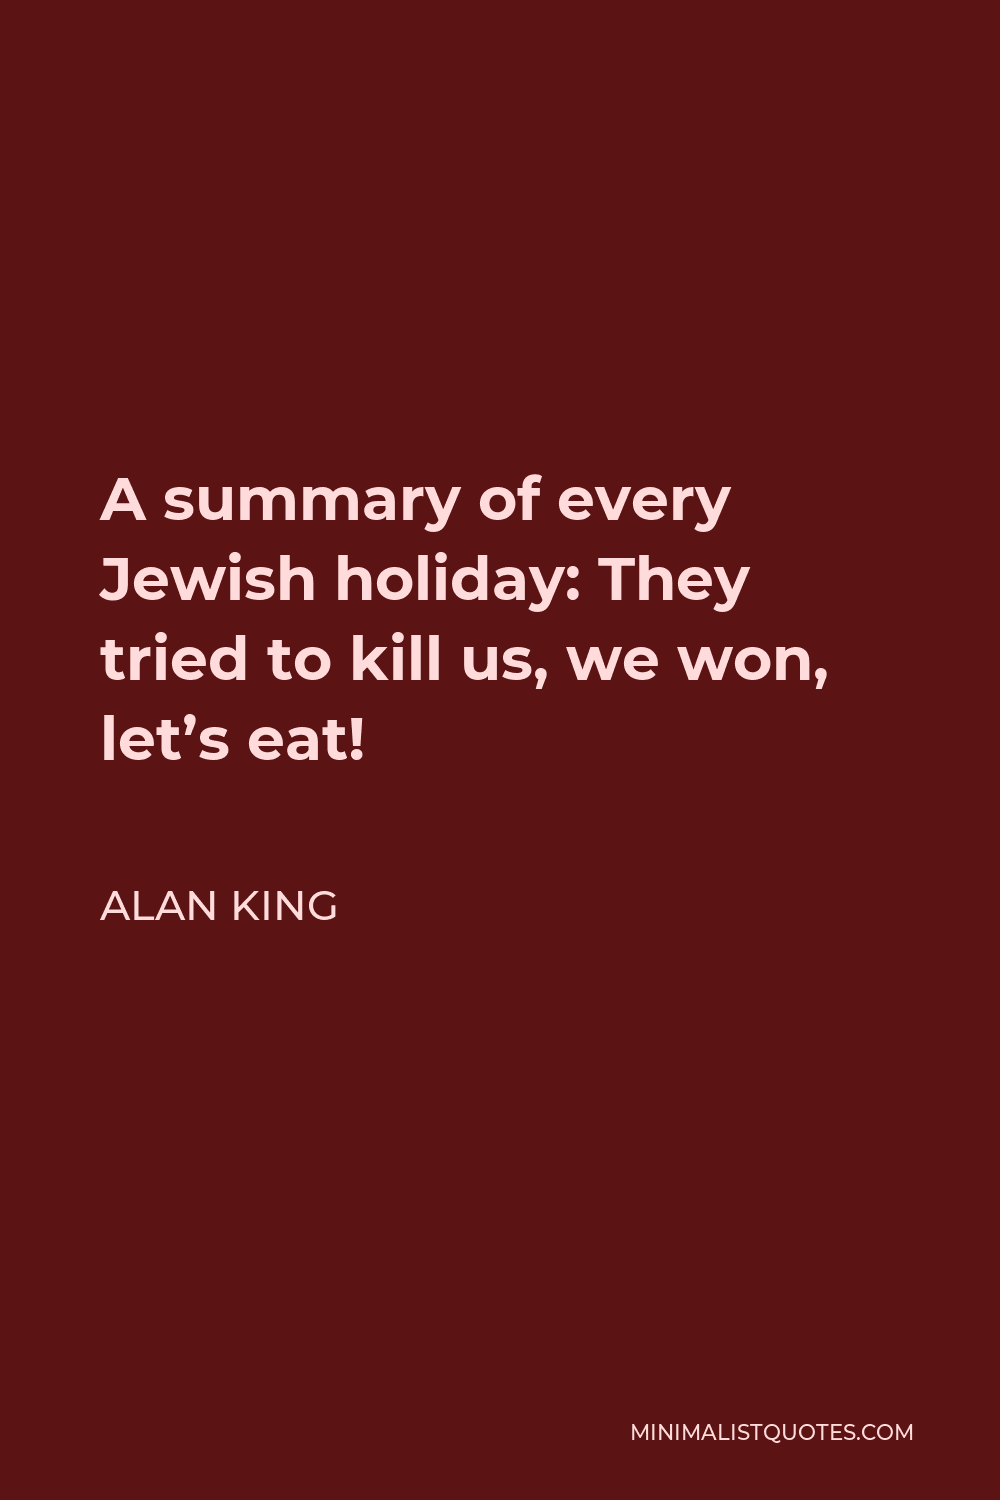 Alan King Quote - A summary of every Jewish holiday: They tried to kill us, we won, let’s eat!